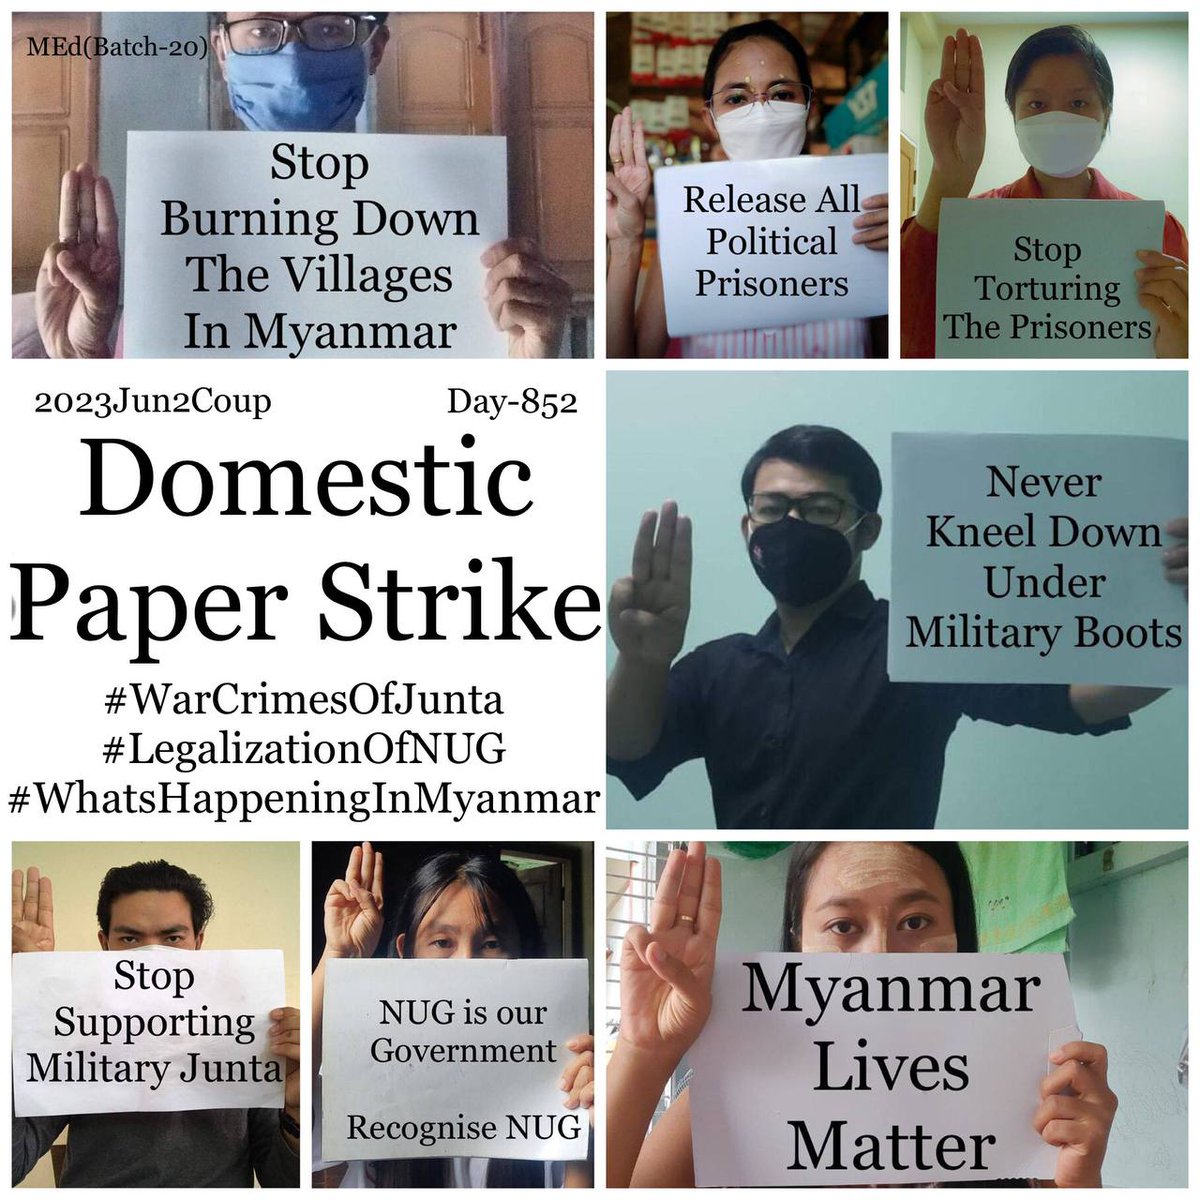 #MYANMAR : Daily anti-coup revolutionary domestic strike by pro-democracy CDMer teachers from #Sagaing University of Education as 852nd day on Jun 2. @Khithitofficial

#LegalizationOfNUG
#2023Jun4Coup
#WhatsHappeningInMyanmar